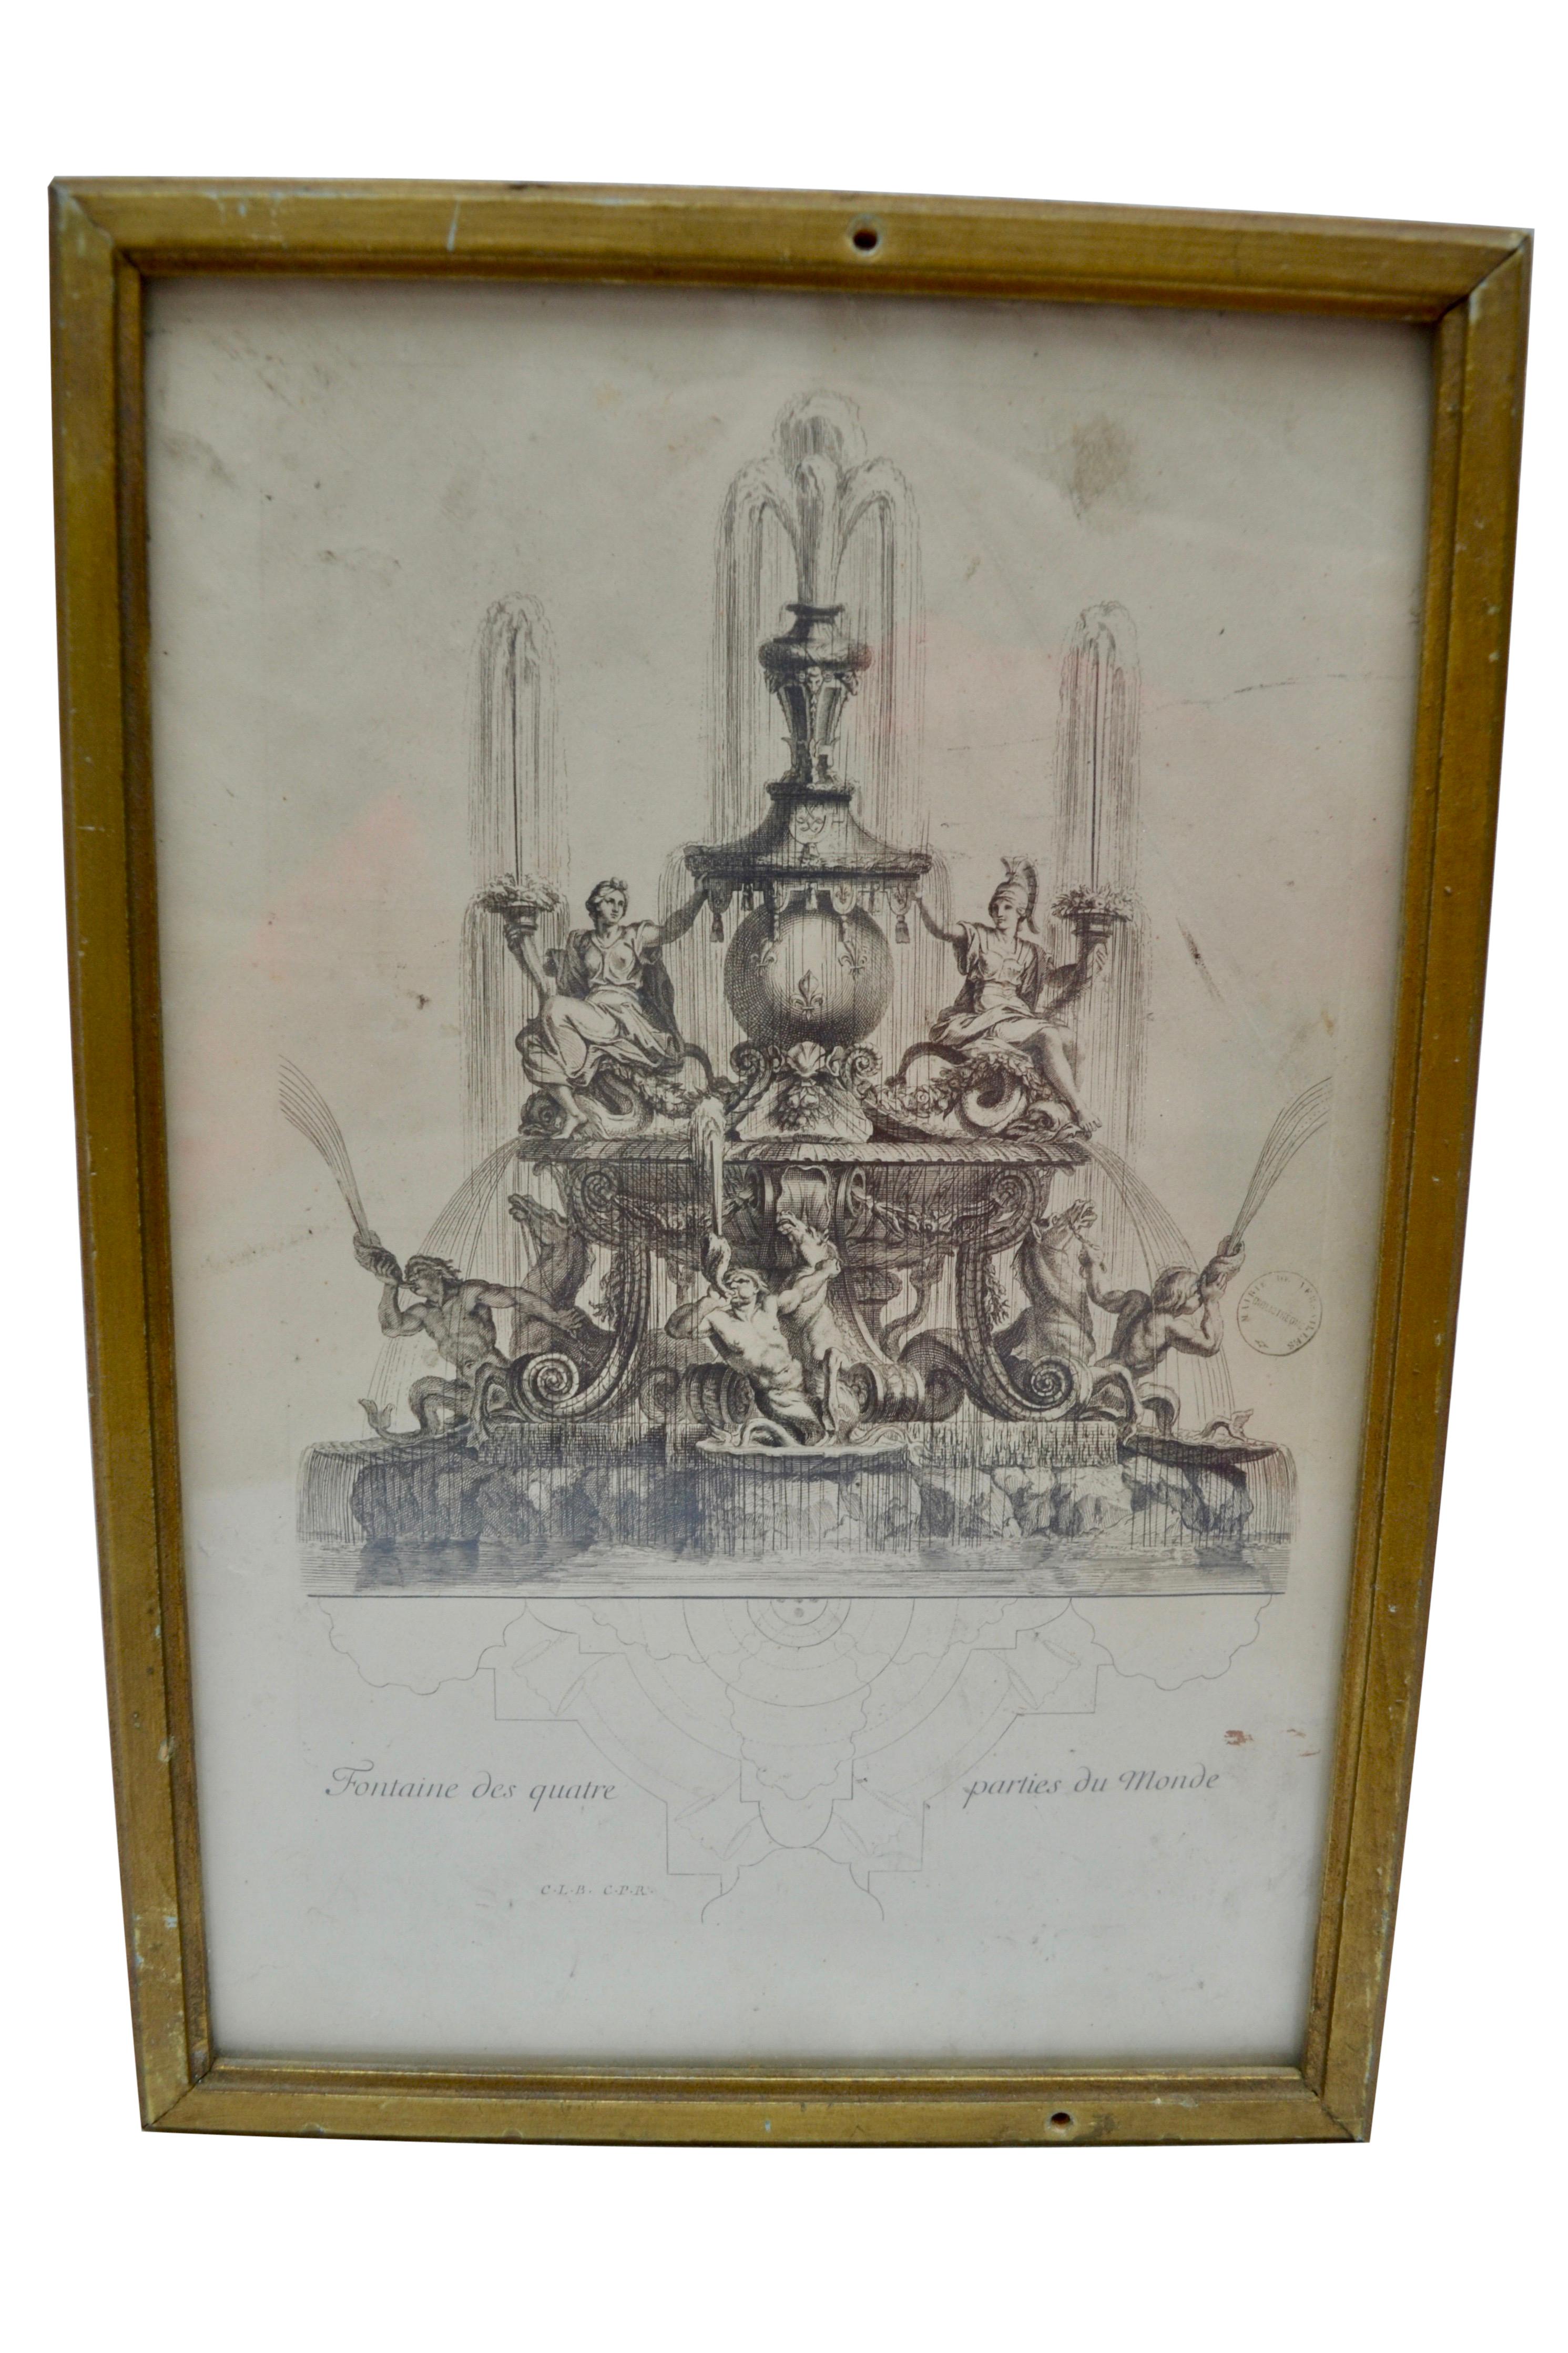 Three small 18th century engravings of fountains at the gardens of Versailles by renowned Parisian engraver Antoine Aveline. All three are presented in simple giltwood frames.

One fountain shows a bronze child representing sovereign power sitting